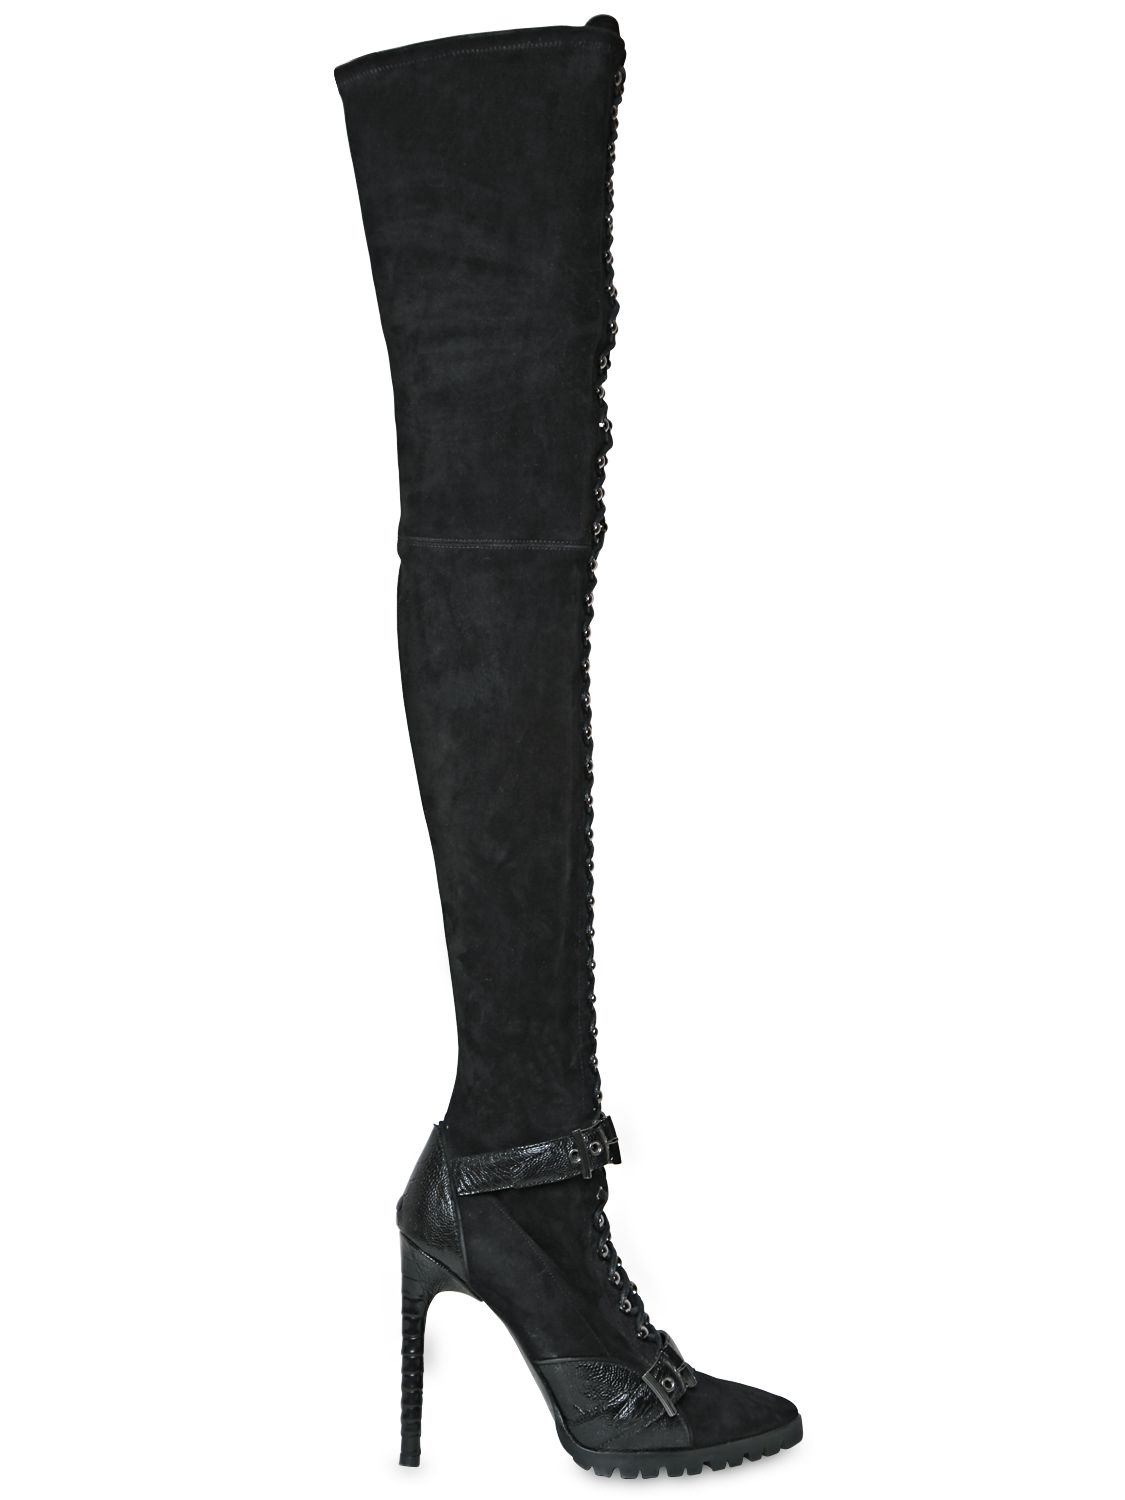 Emilio Pucci 115Mm Suede Ostrich Over The Knee Boots in Black - Lyst